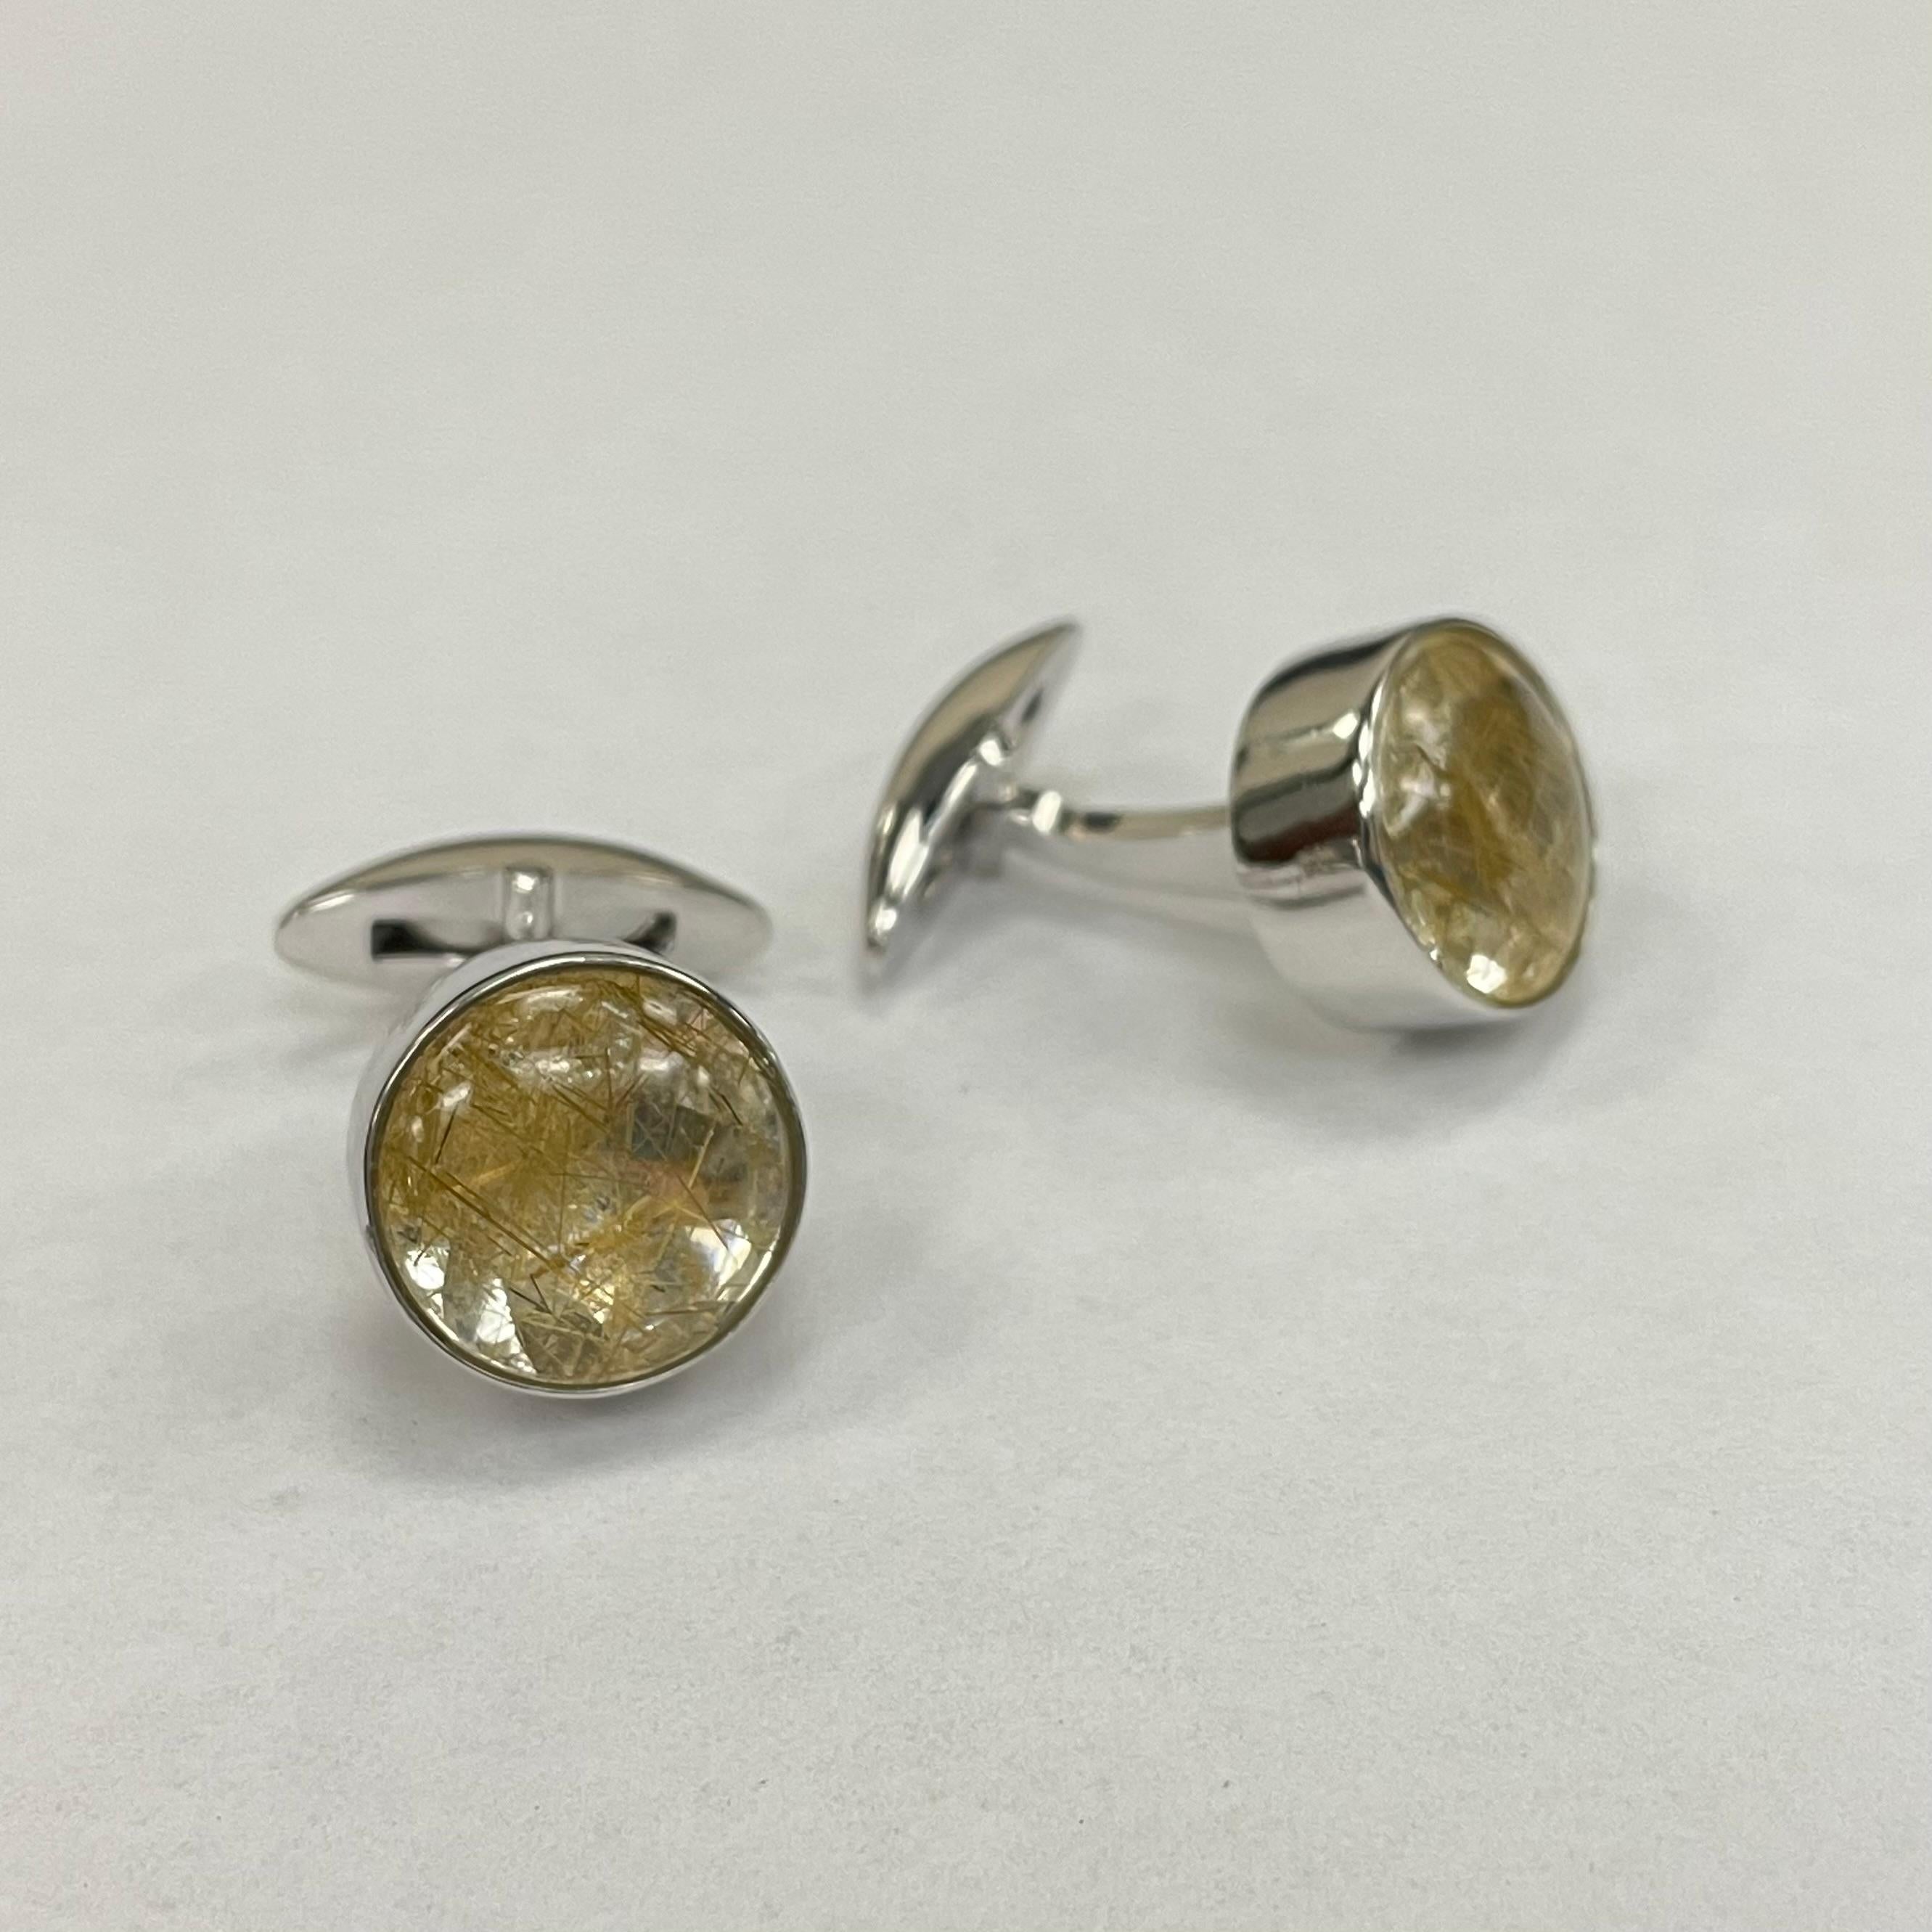 Golden Rutilated Quartz quickens the process of manifestation, intuition, emotional catharsis, psychic opening, consciousness expansion, and inter-dimensional travel. It assists us in attuning to our Higher Self and helps us know if someone or